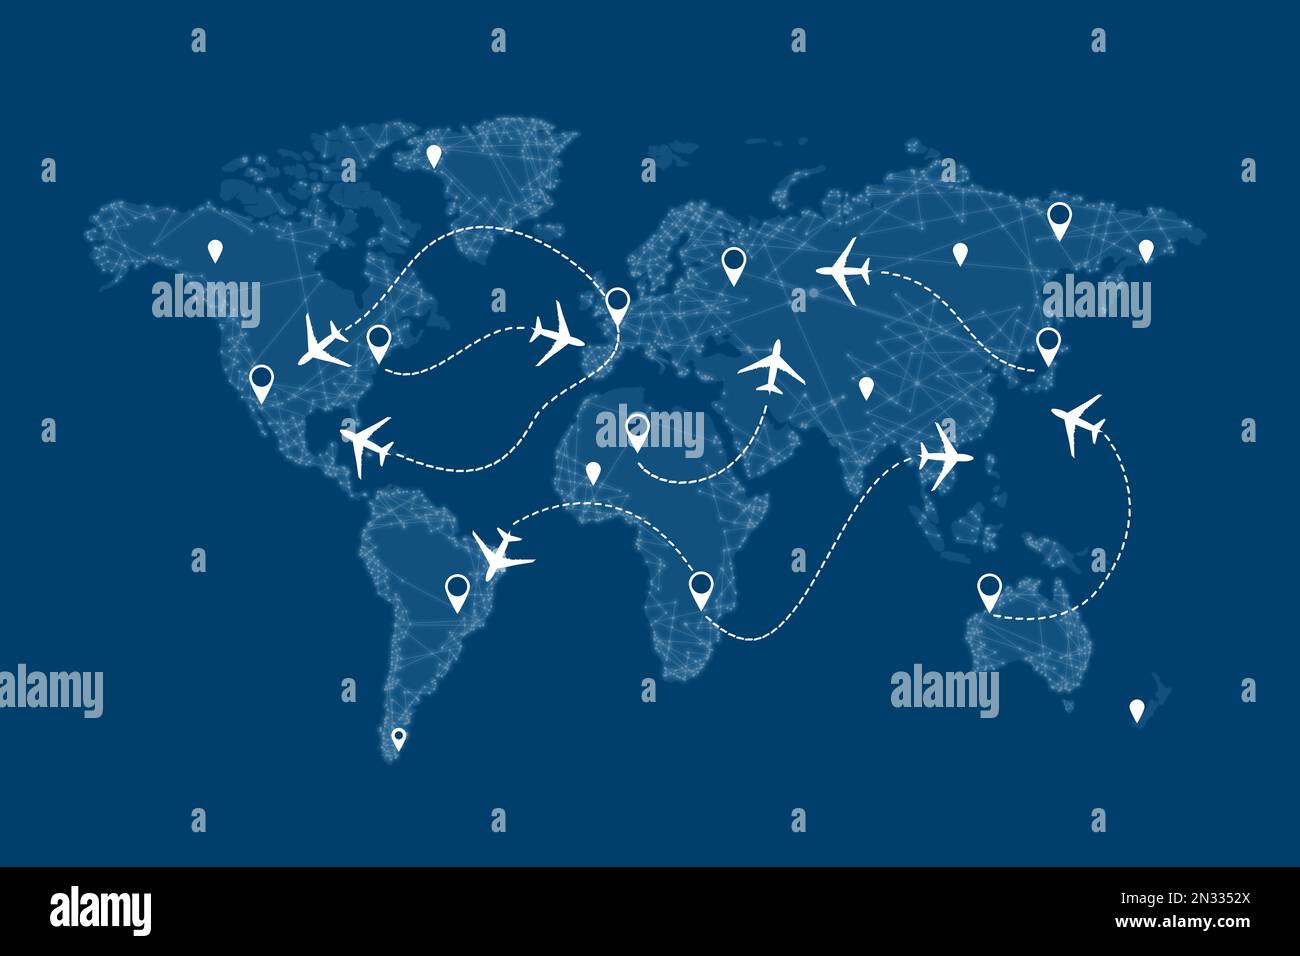 Flight routs map with airplanes on it, illustration Stock Photo